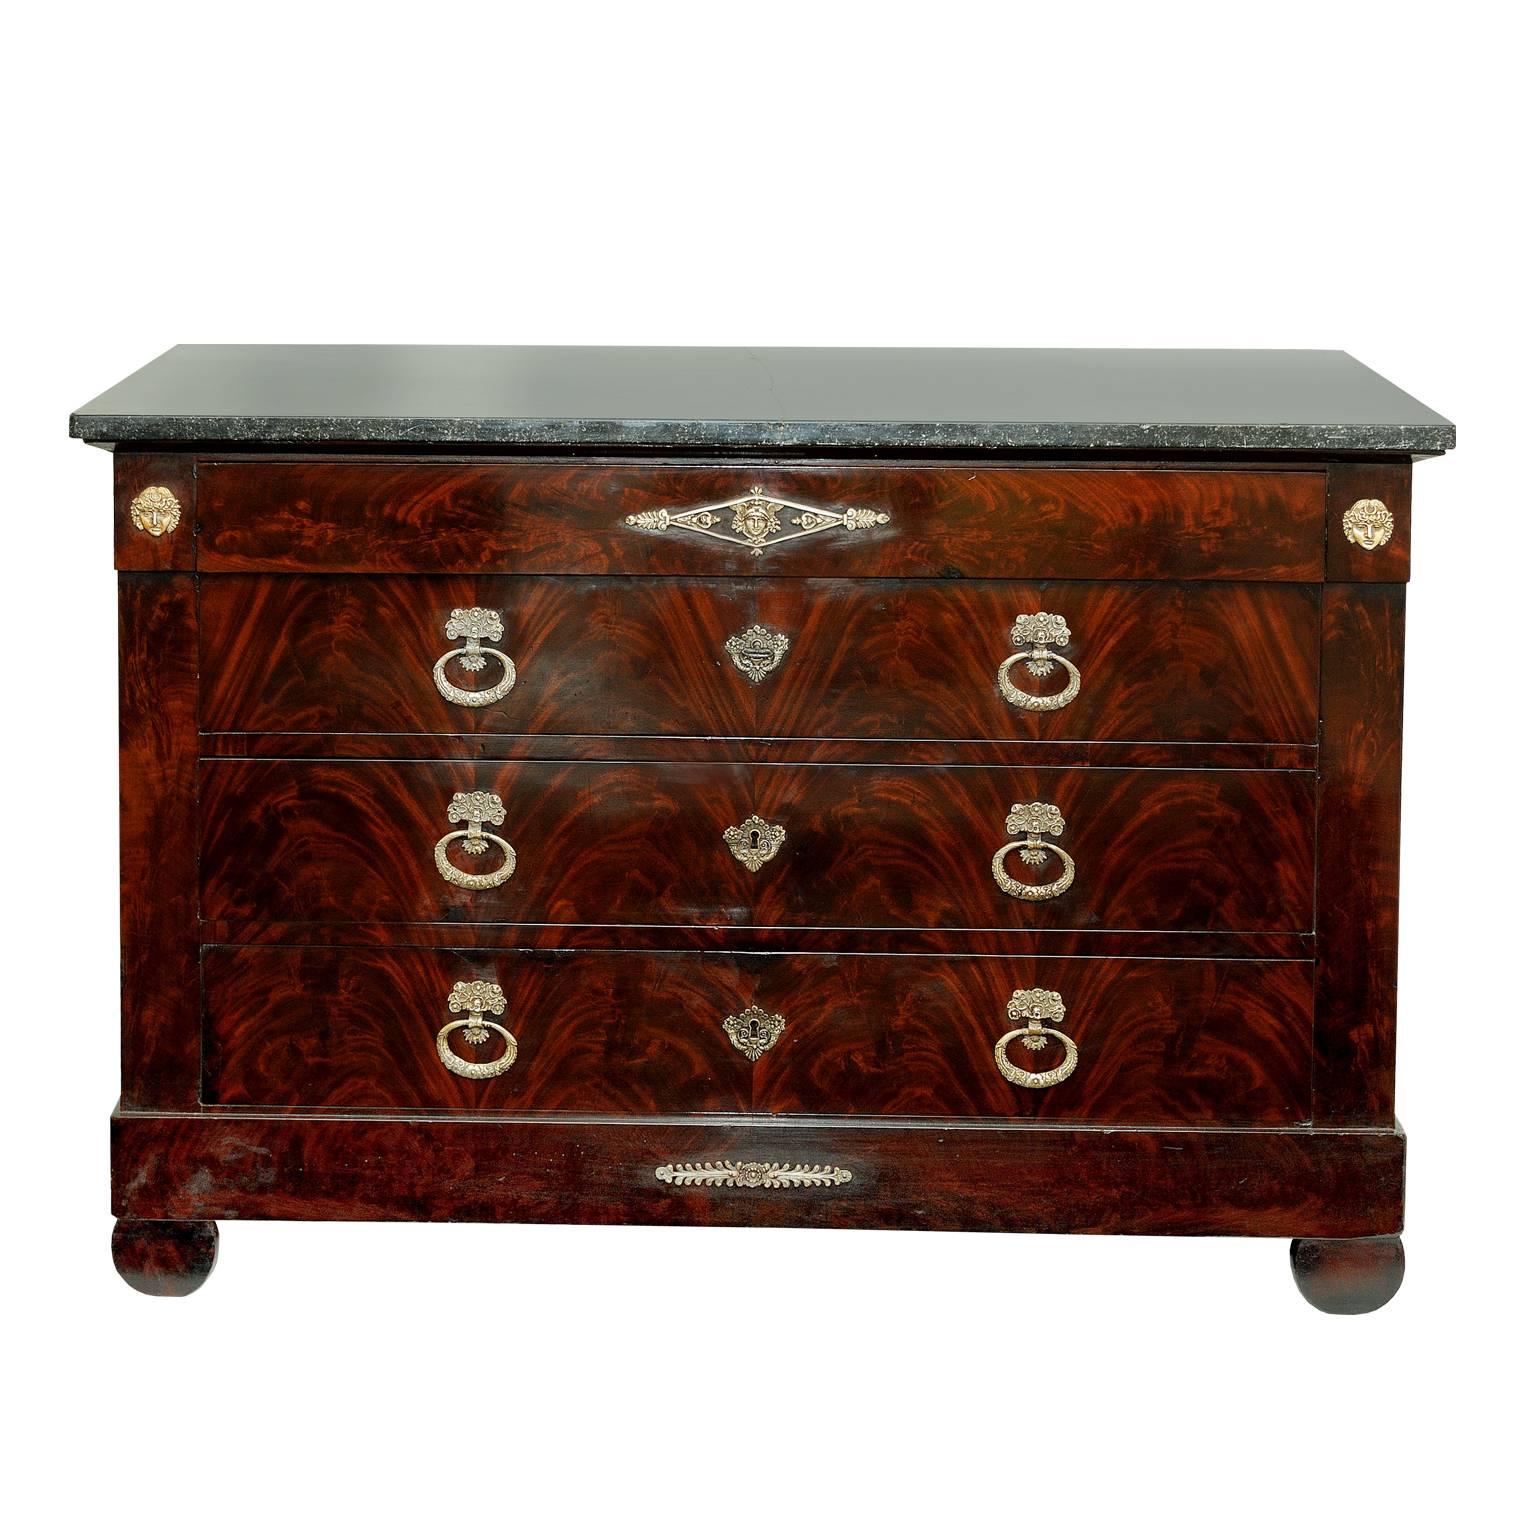 This is a wonderful French 19th century Napoleonic Empire period mahogany commode chest of drawers, displaying great color and complete with original marble top and beautiful brass handles and escutcheons, circa 1820.